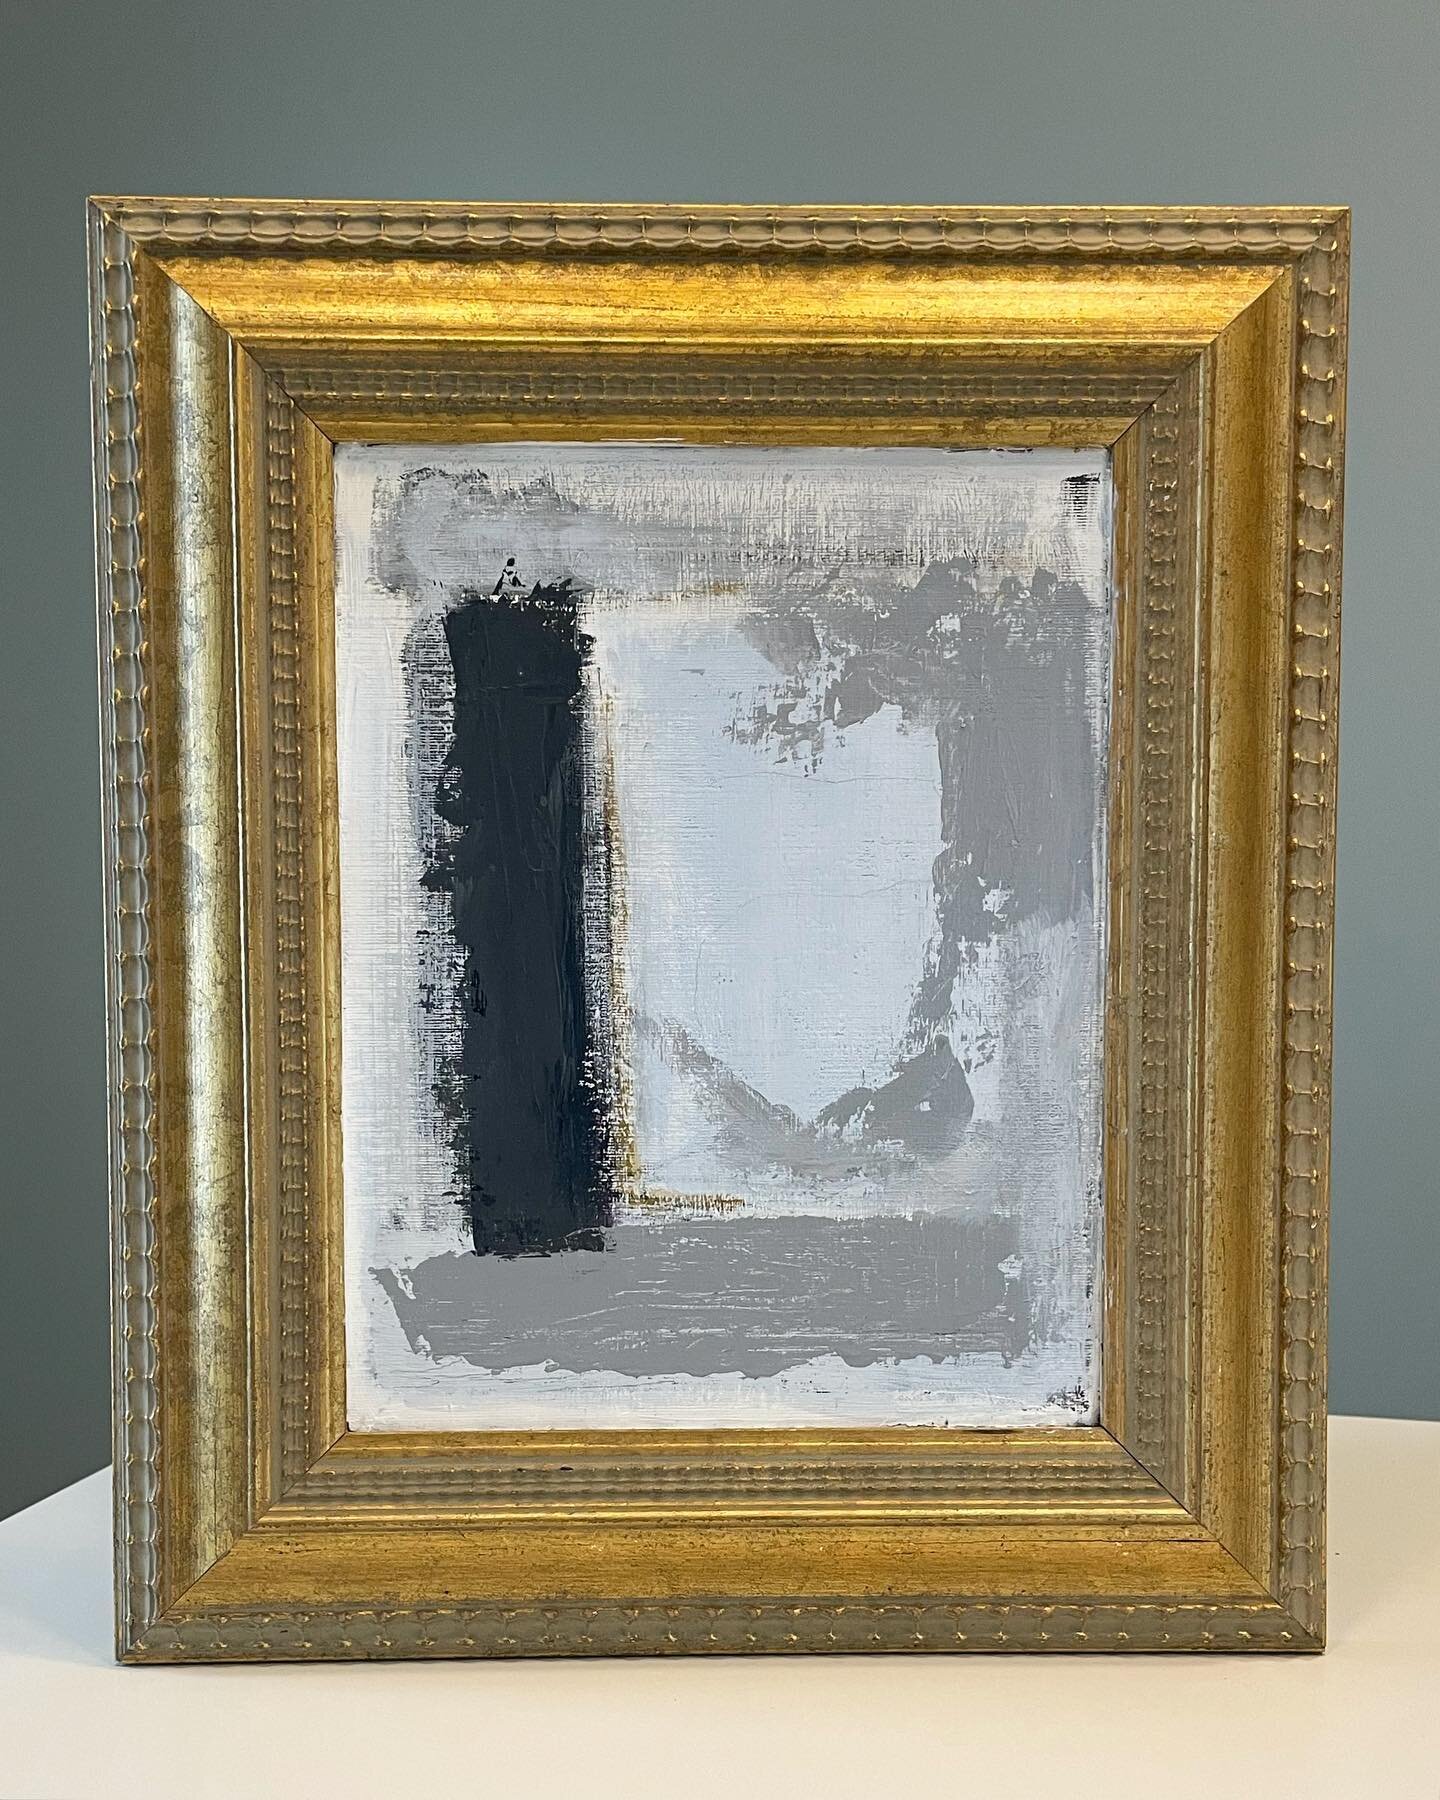 My latest piece. 💛 Found this vintage frame at flea market and knew I had to paint an abstract to nestle inside. 
Cause opposites attract.👌🏻 @paulaabdul taught me that as a kid, and I&rsquo;ll never forget it. 

#oppositesattract #abstractart #art